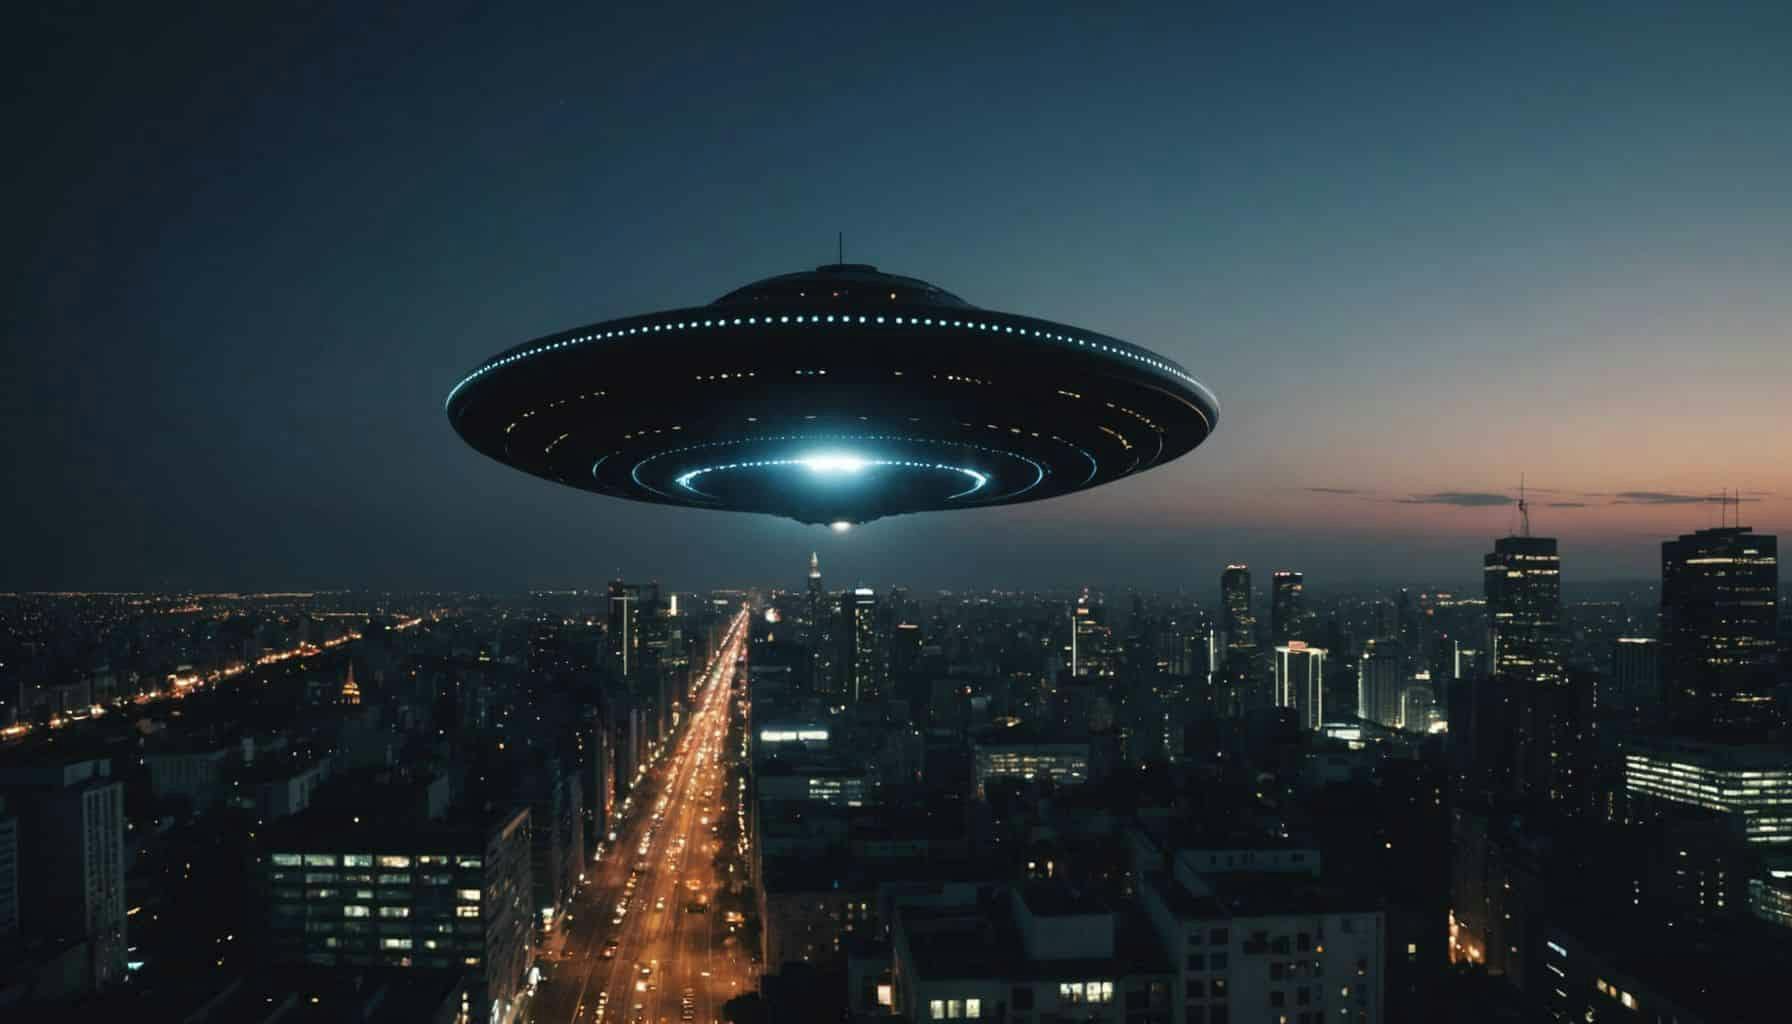 The Truth Behind UFO Sightings: Extraterrestrial or Man-Made?